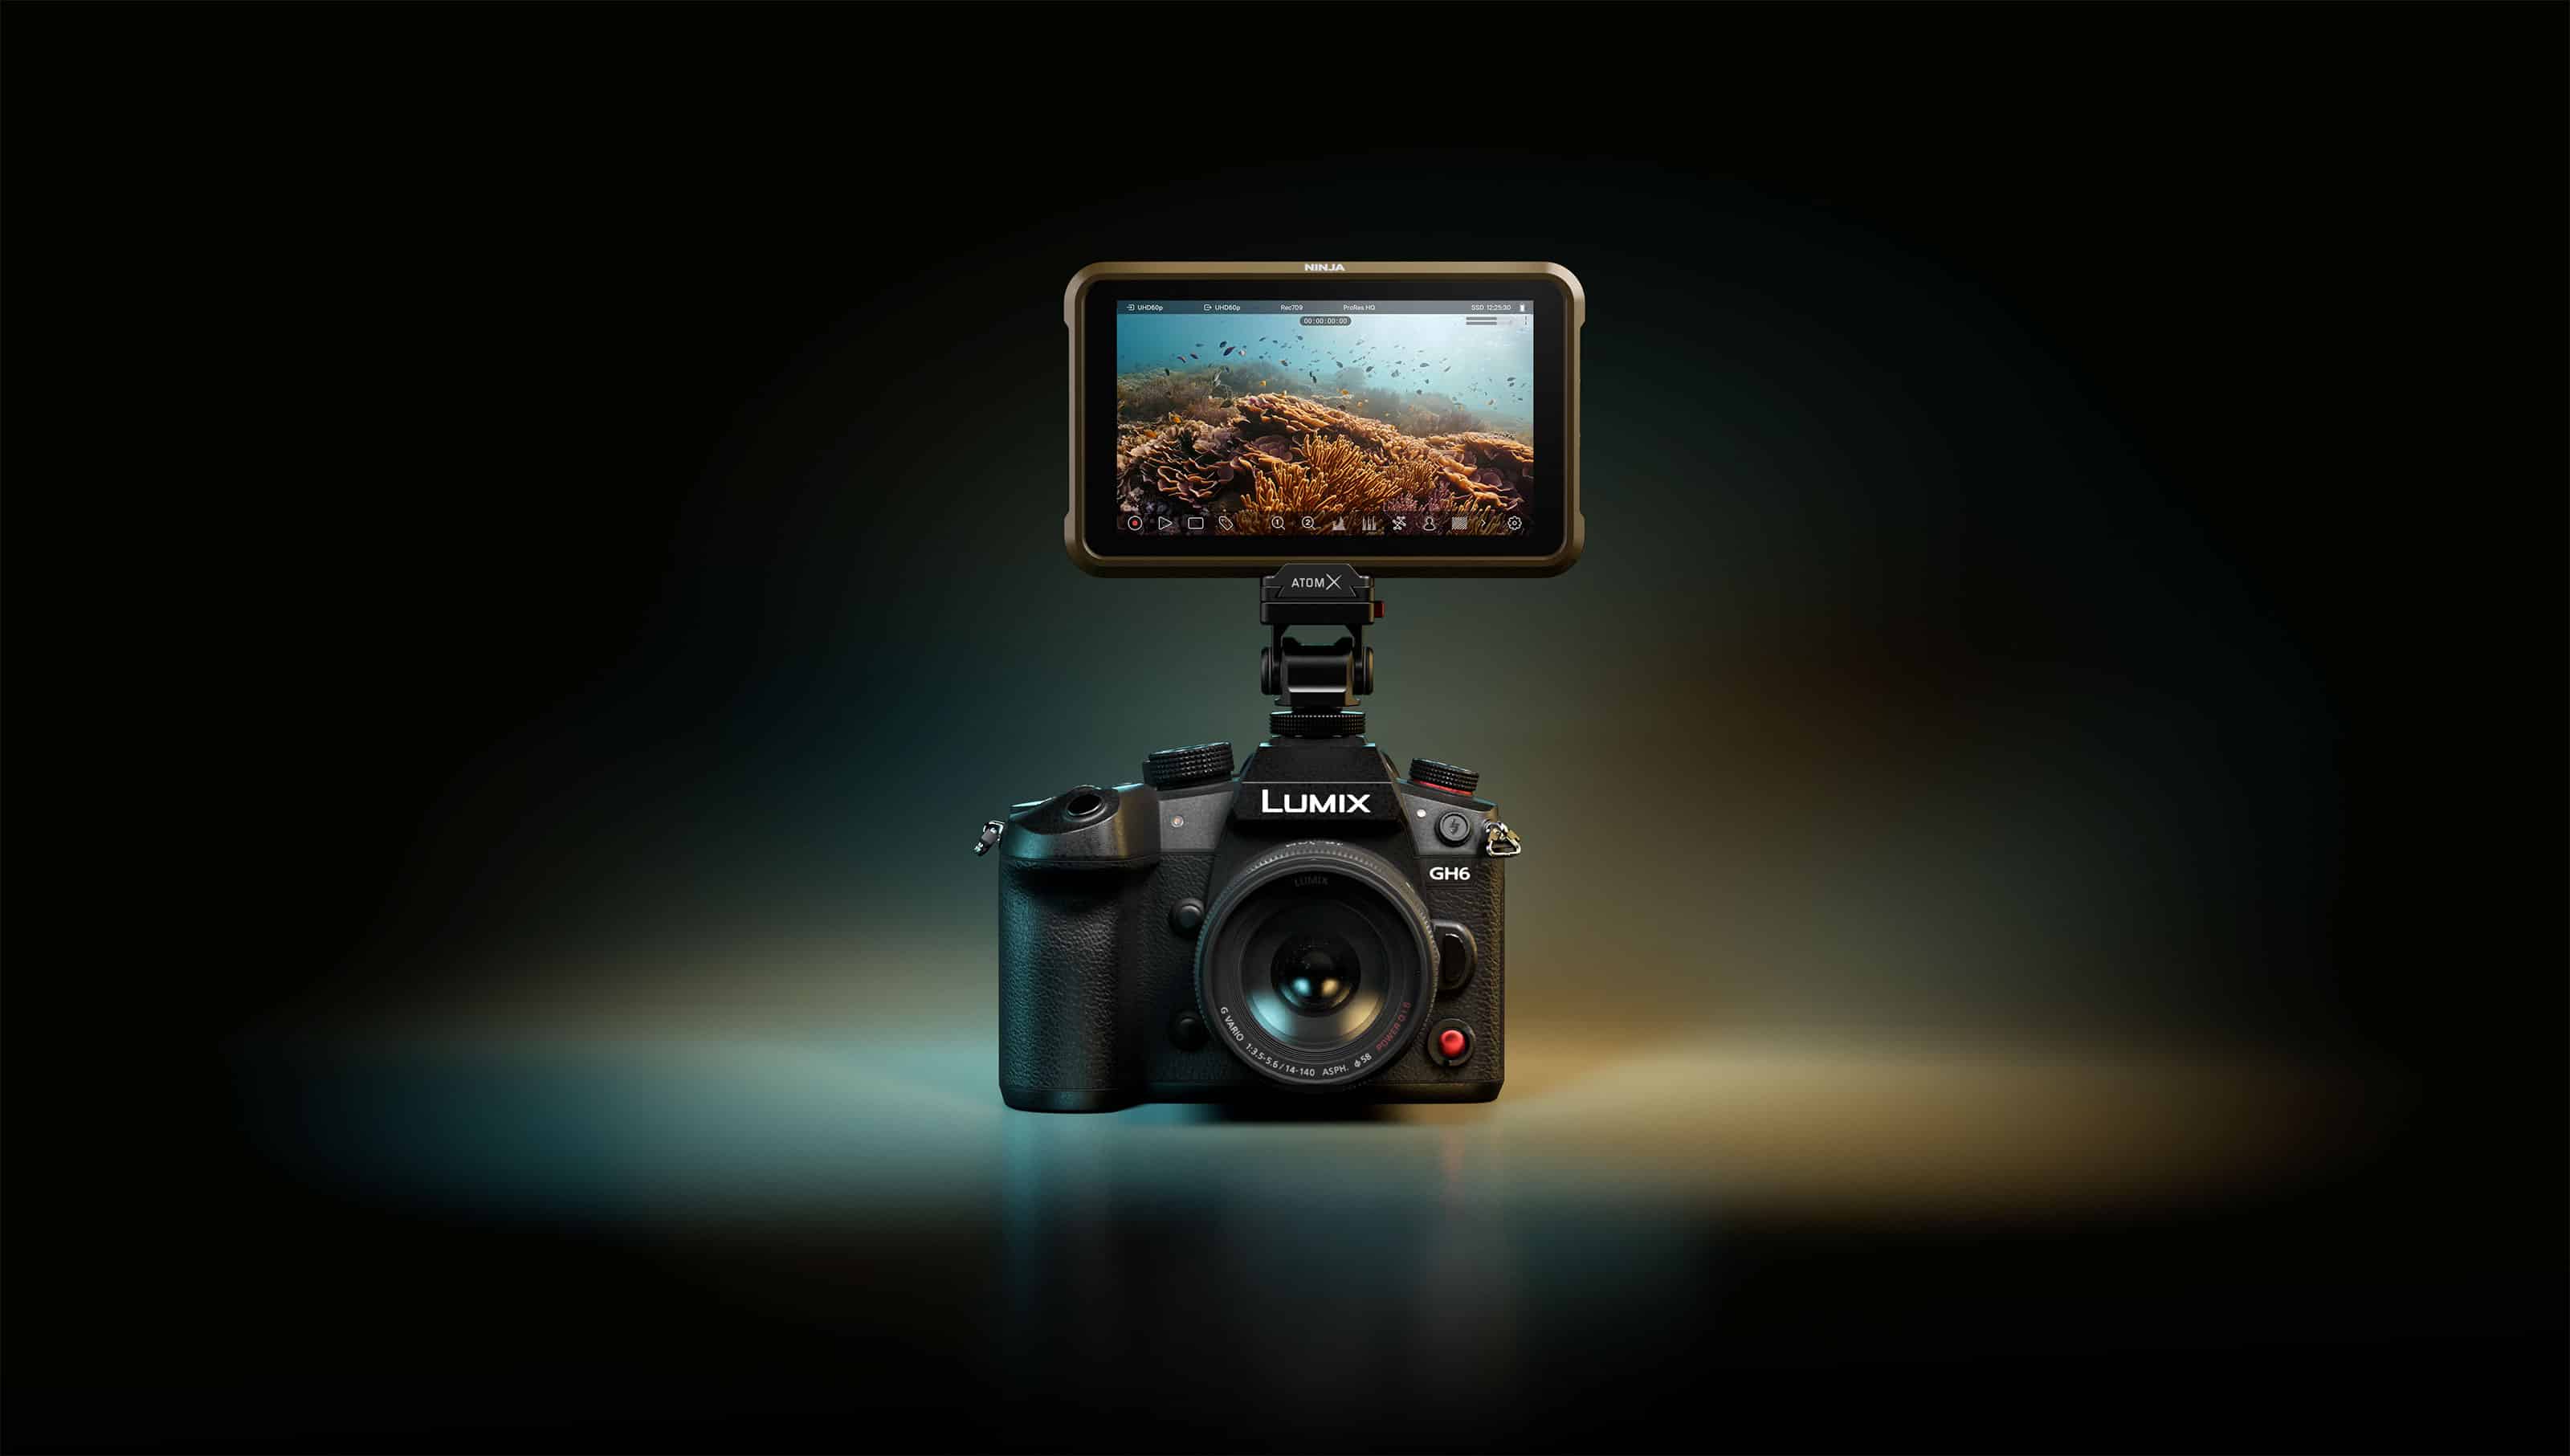 ATOMOS Ninja V / V+ now Includes Full ASSIMILATE Play Pro License – Limited  Time Deal